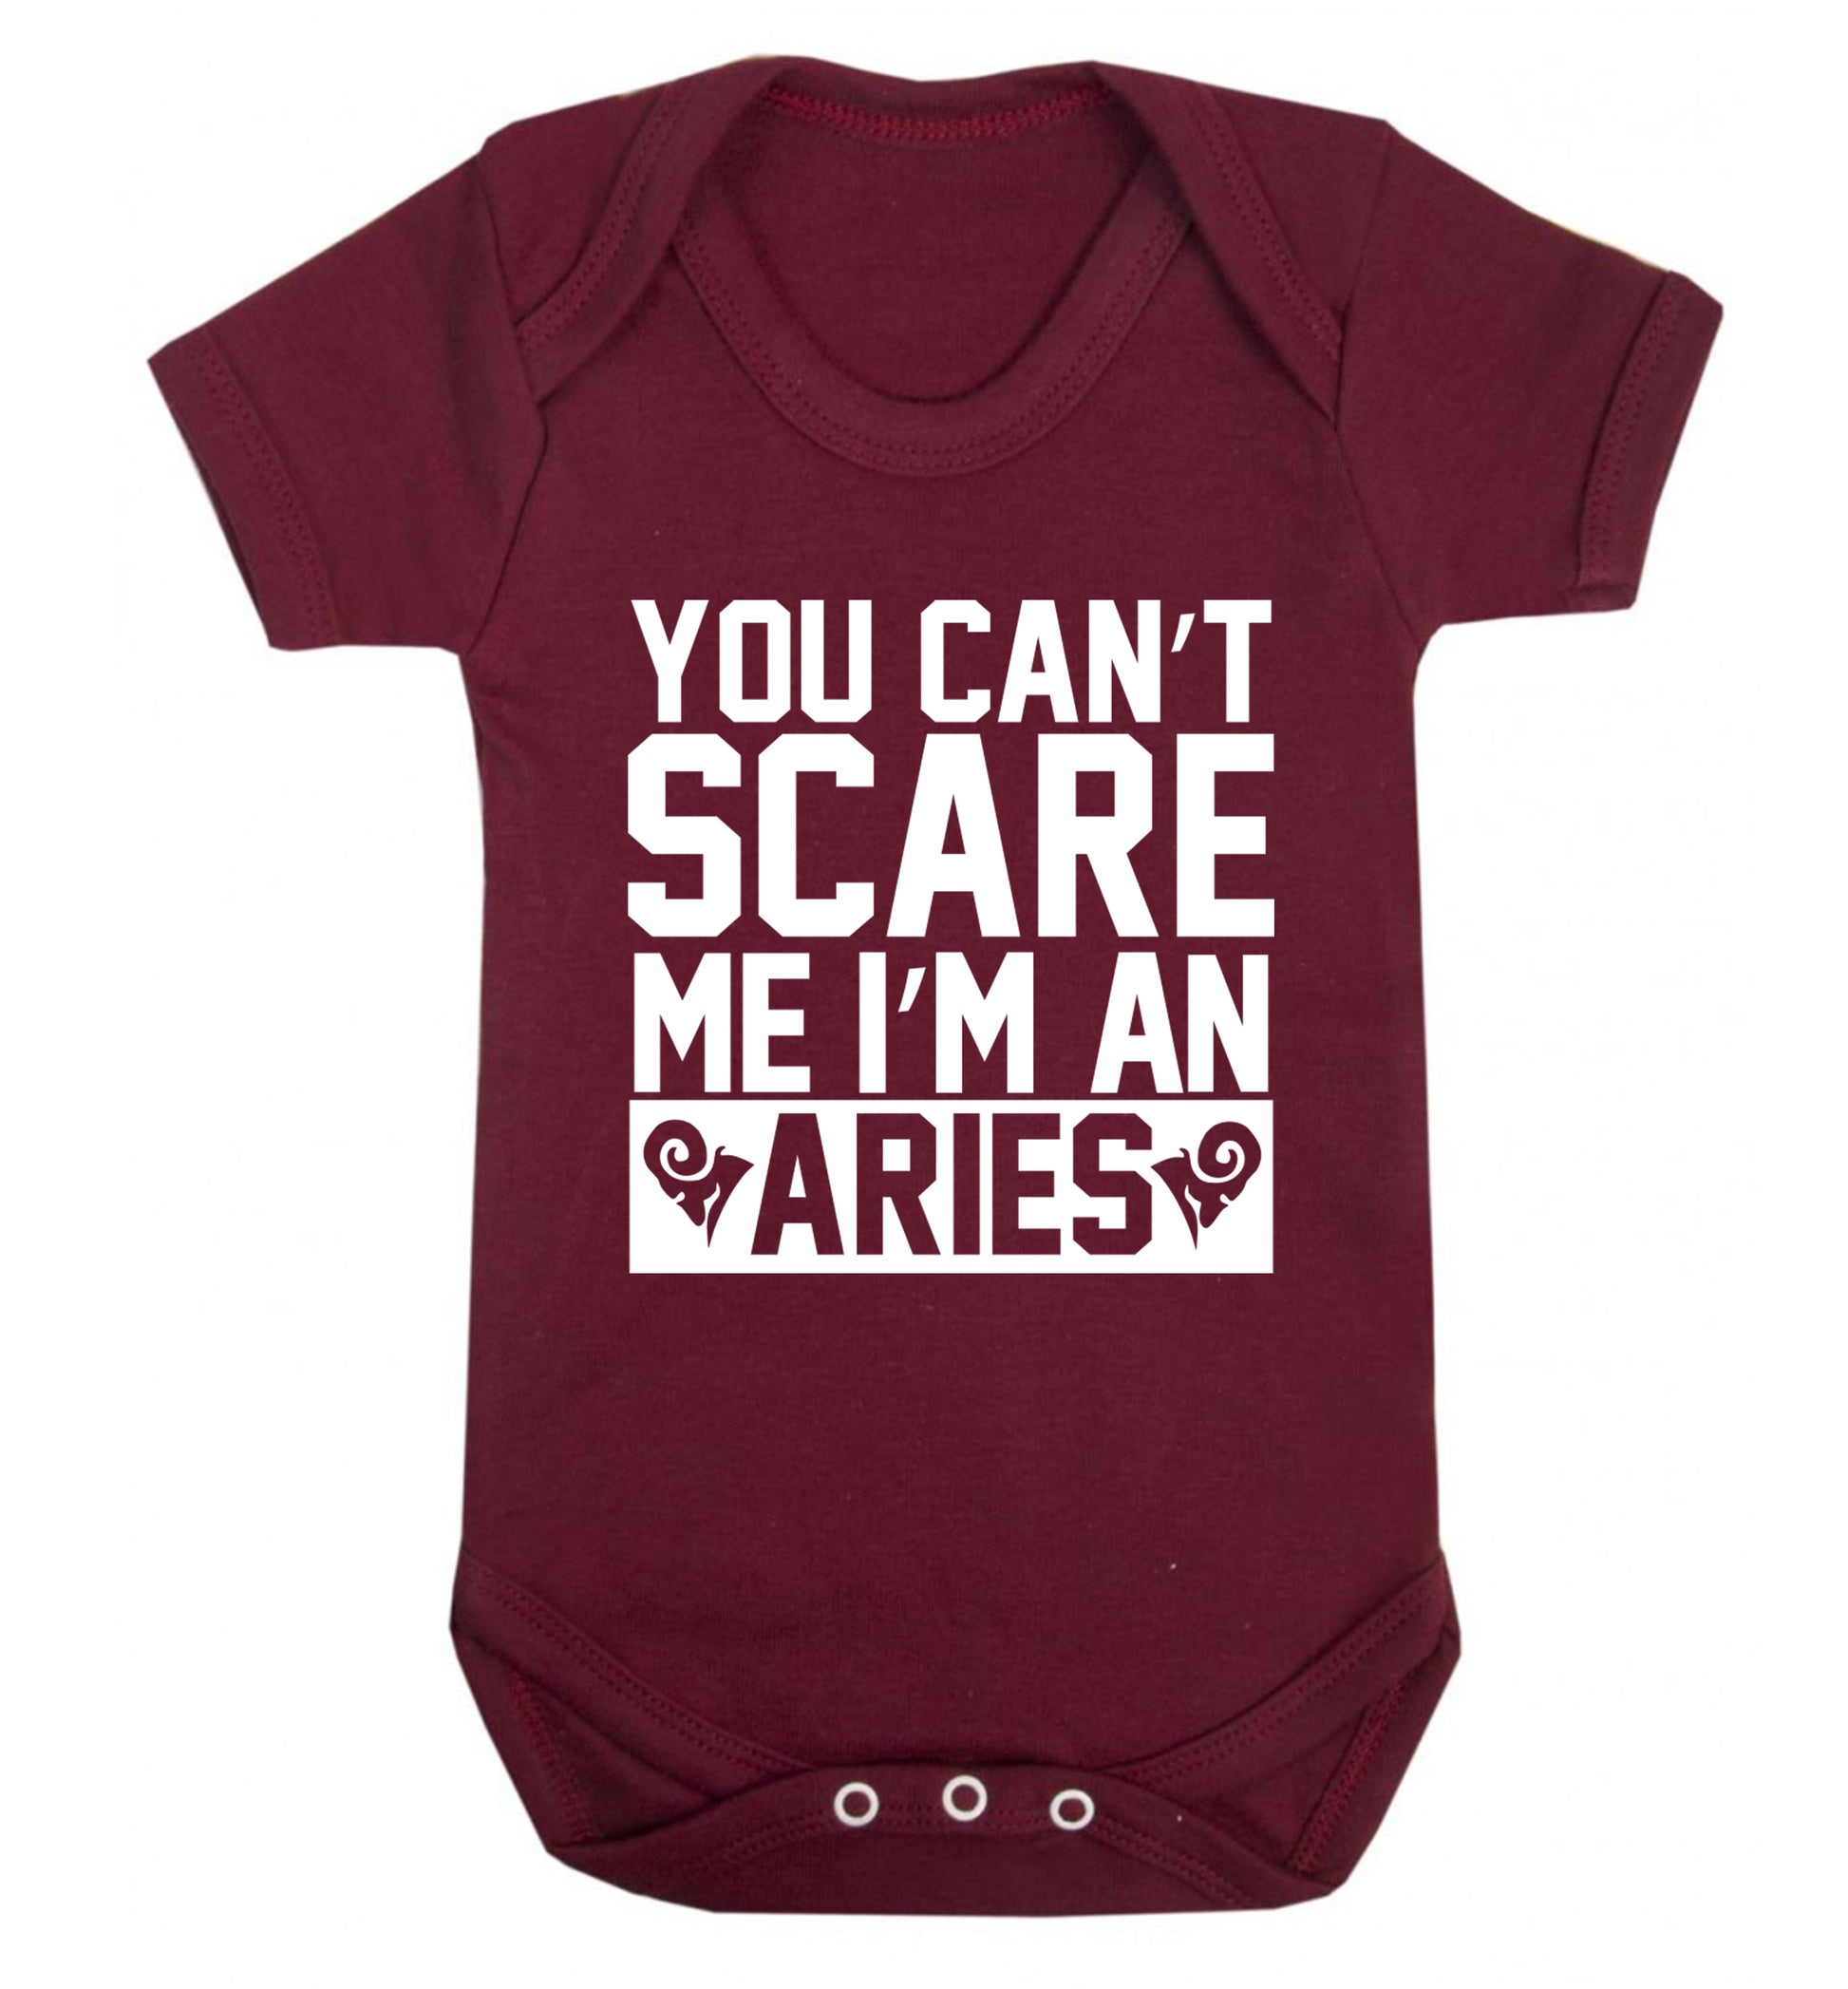 You can't scare me I'm an aries Baby Vest maroon 18-24 months